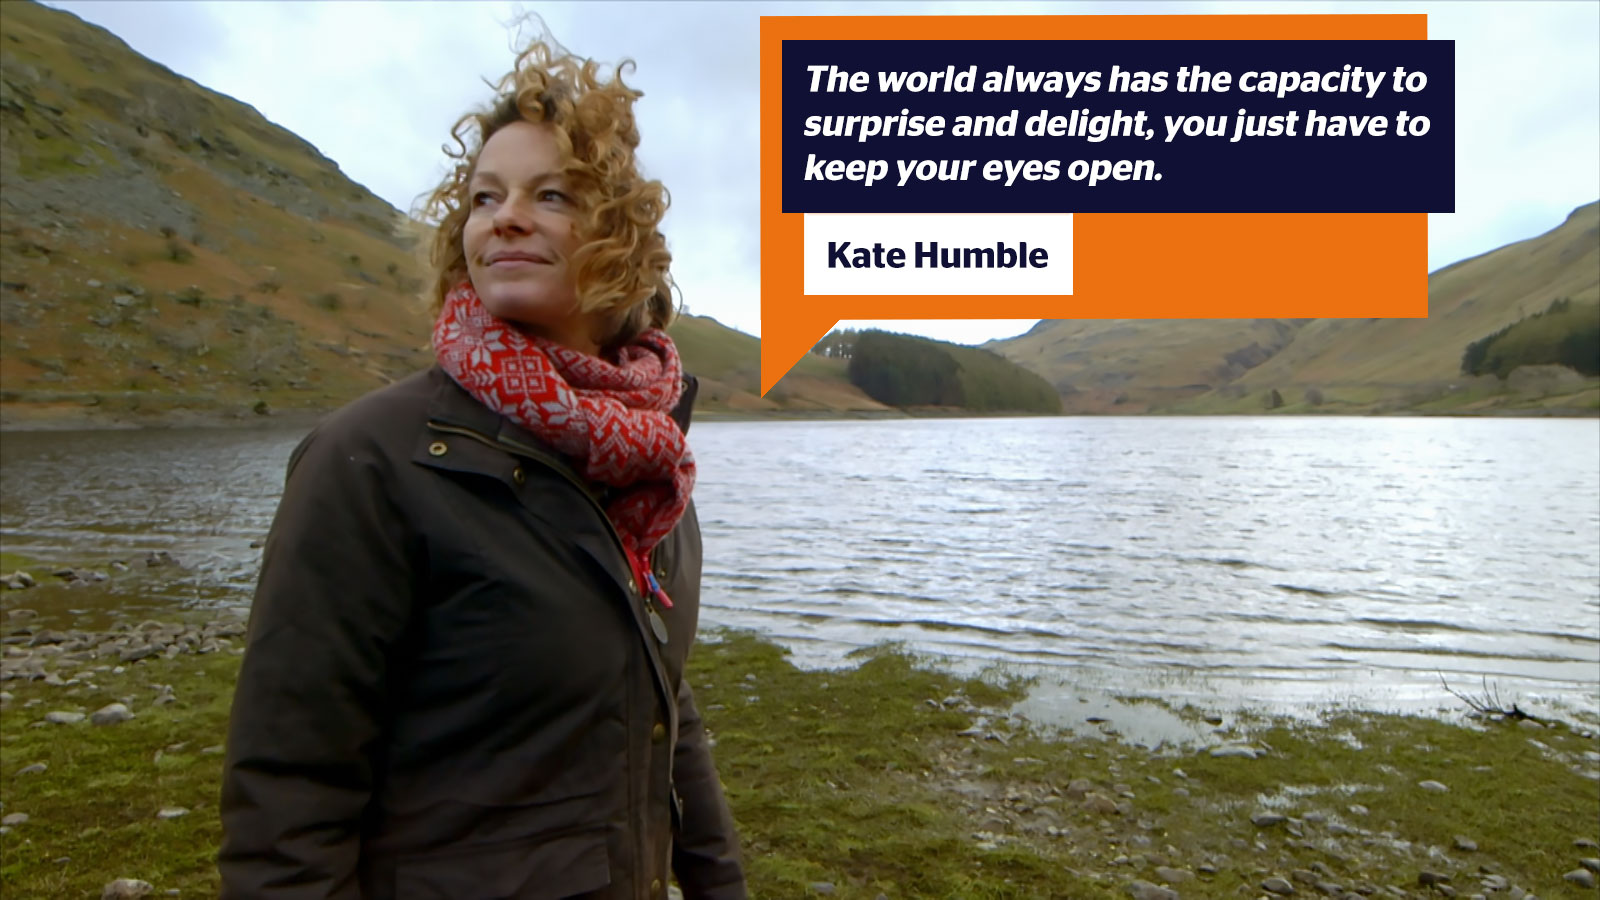 The world always has the capacity to surprise and delight, you just have to keep your eyes open. - kate humble (Watch "Back to the Land with Kate Humble" on Together TV)